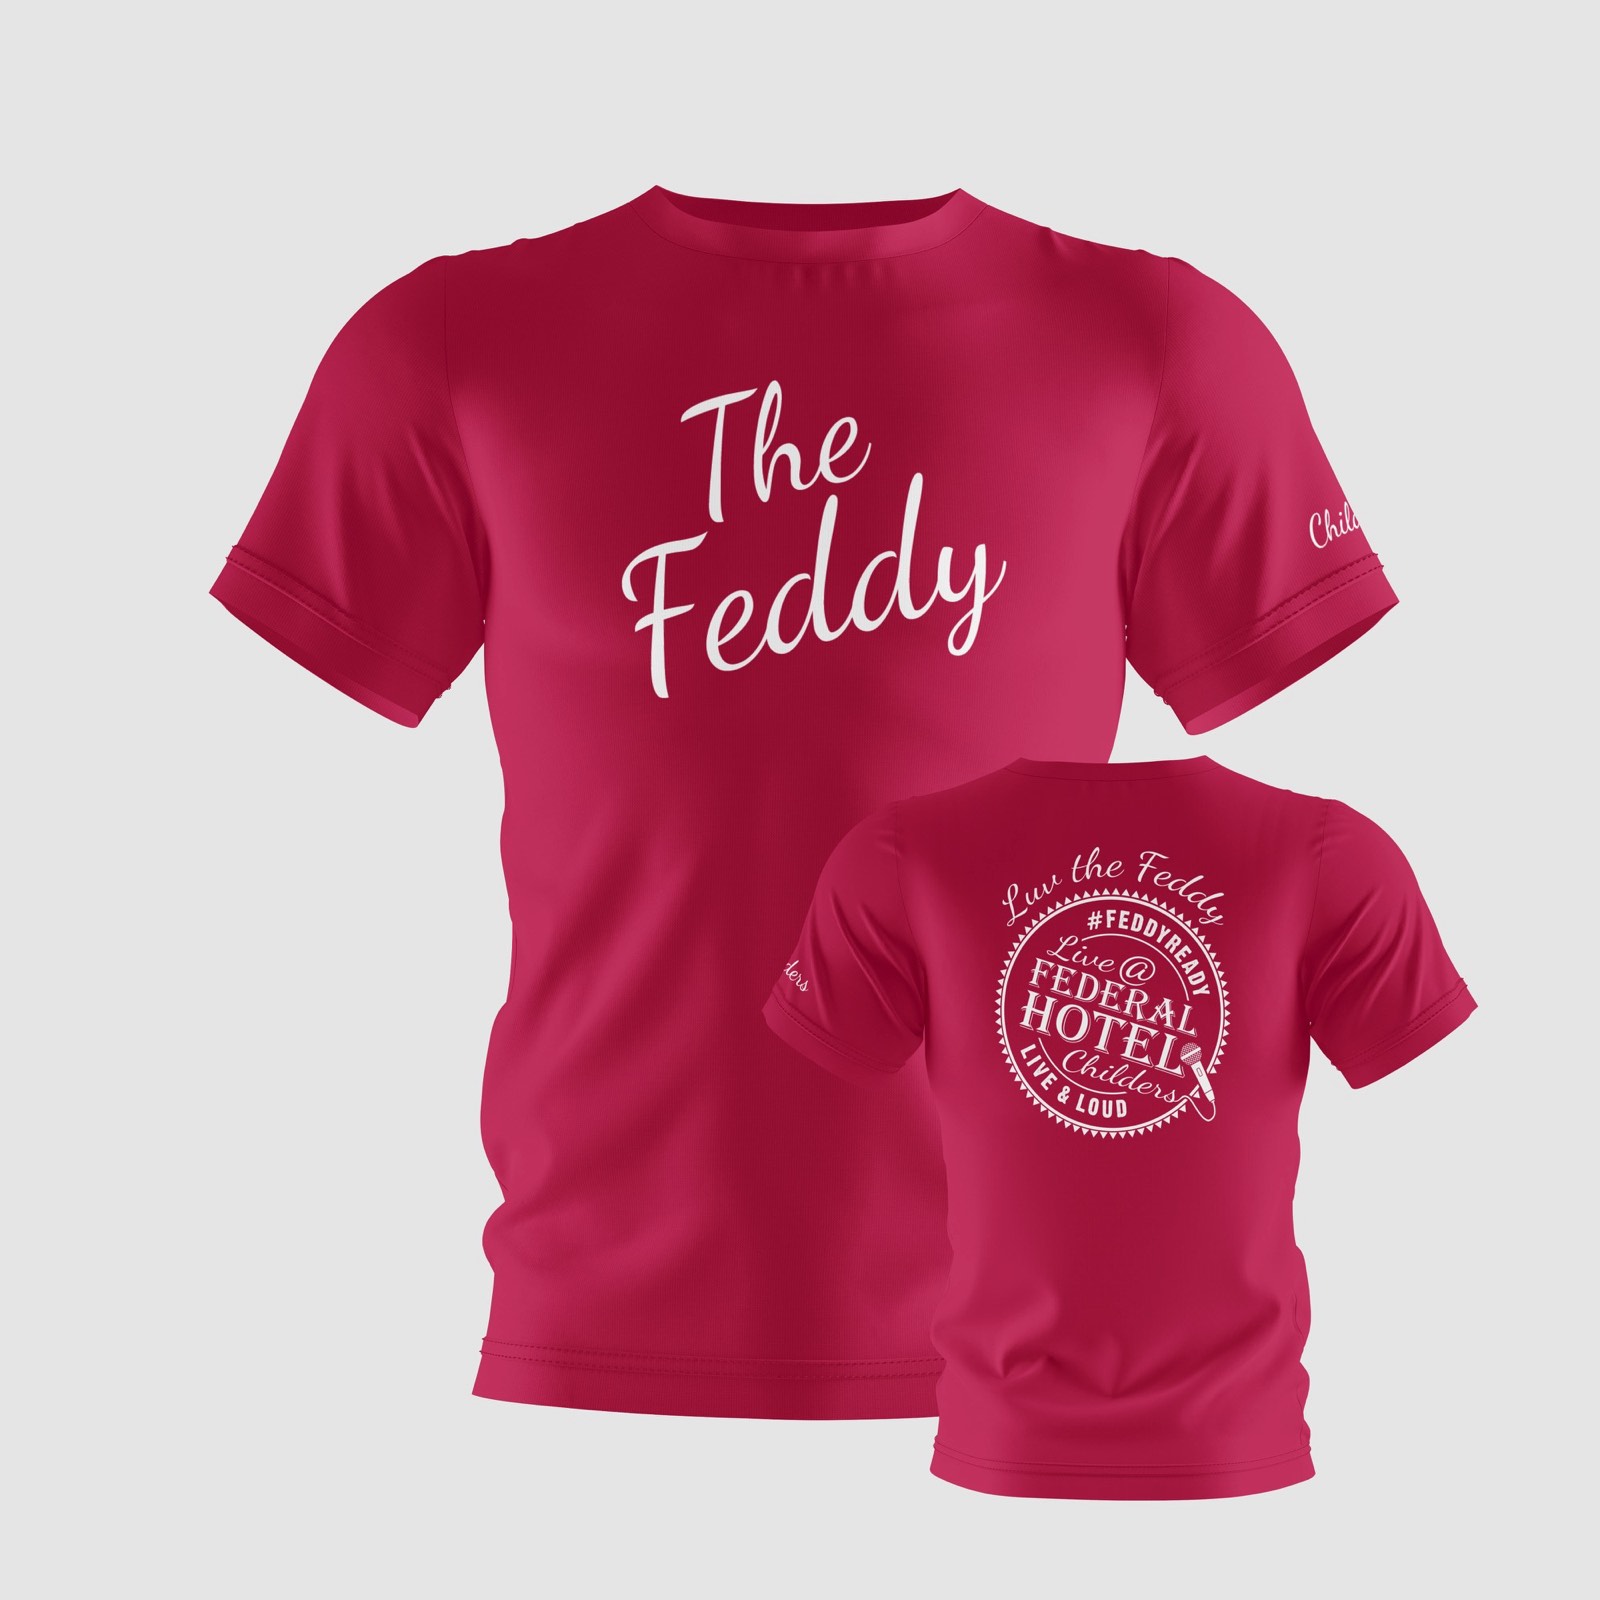 The Feddy printed T-shirt front and back - Pink